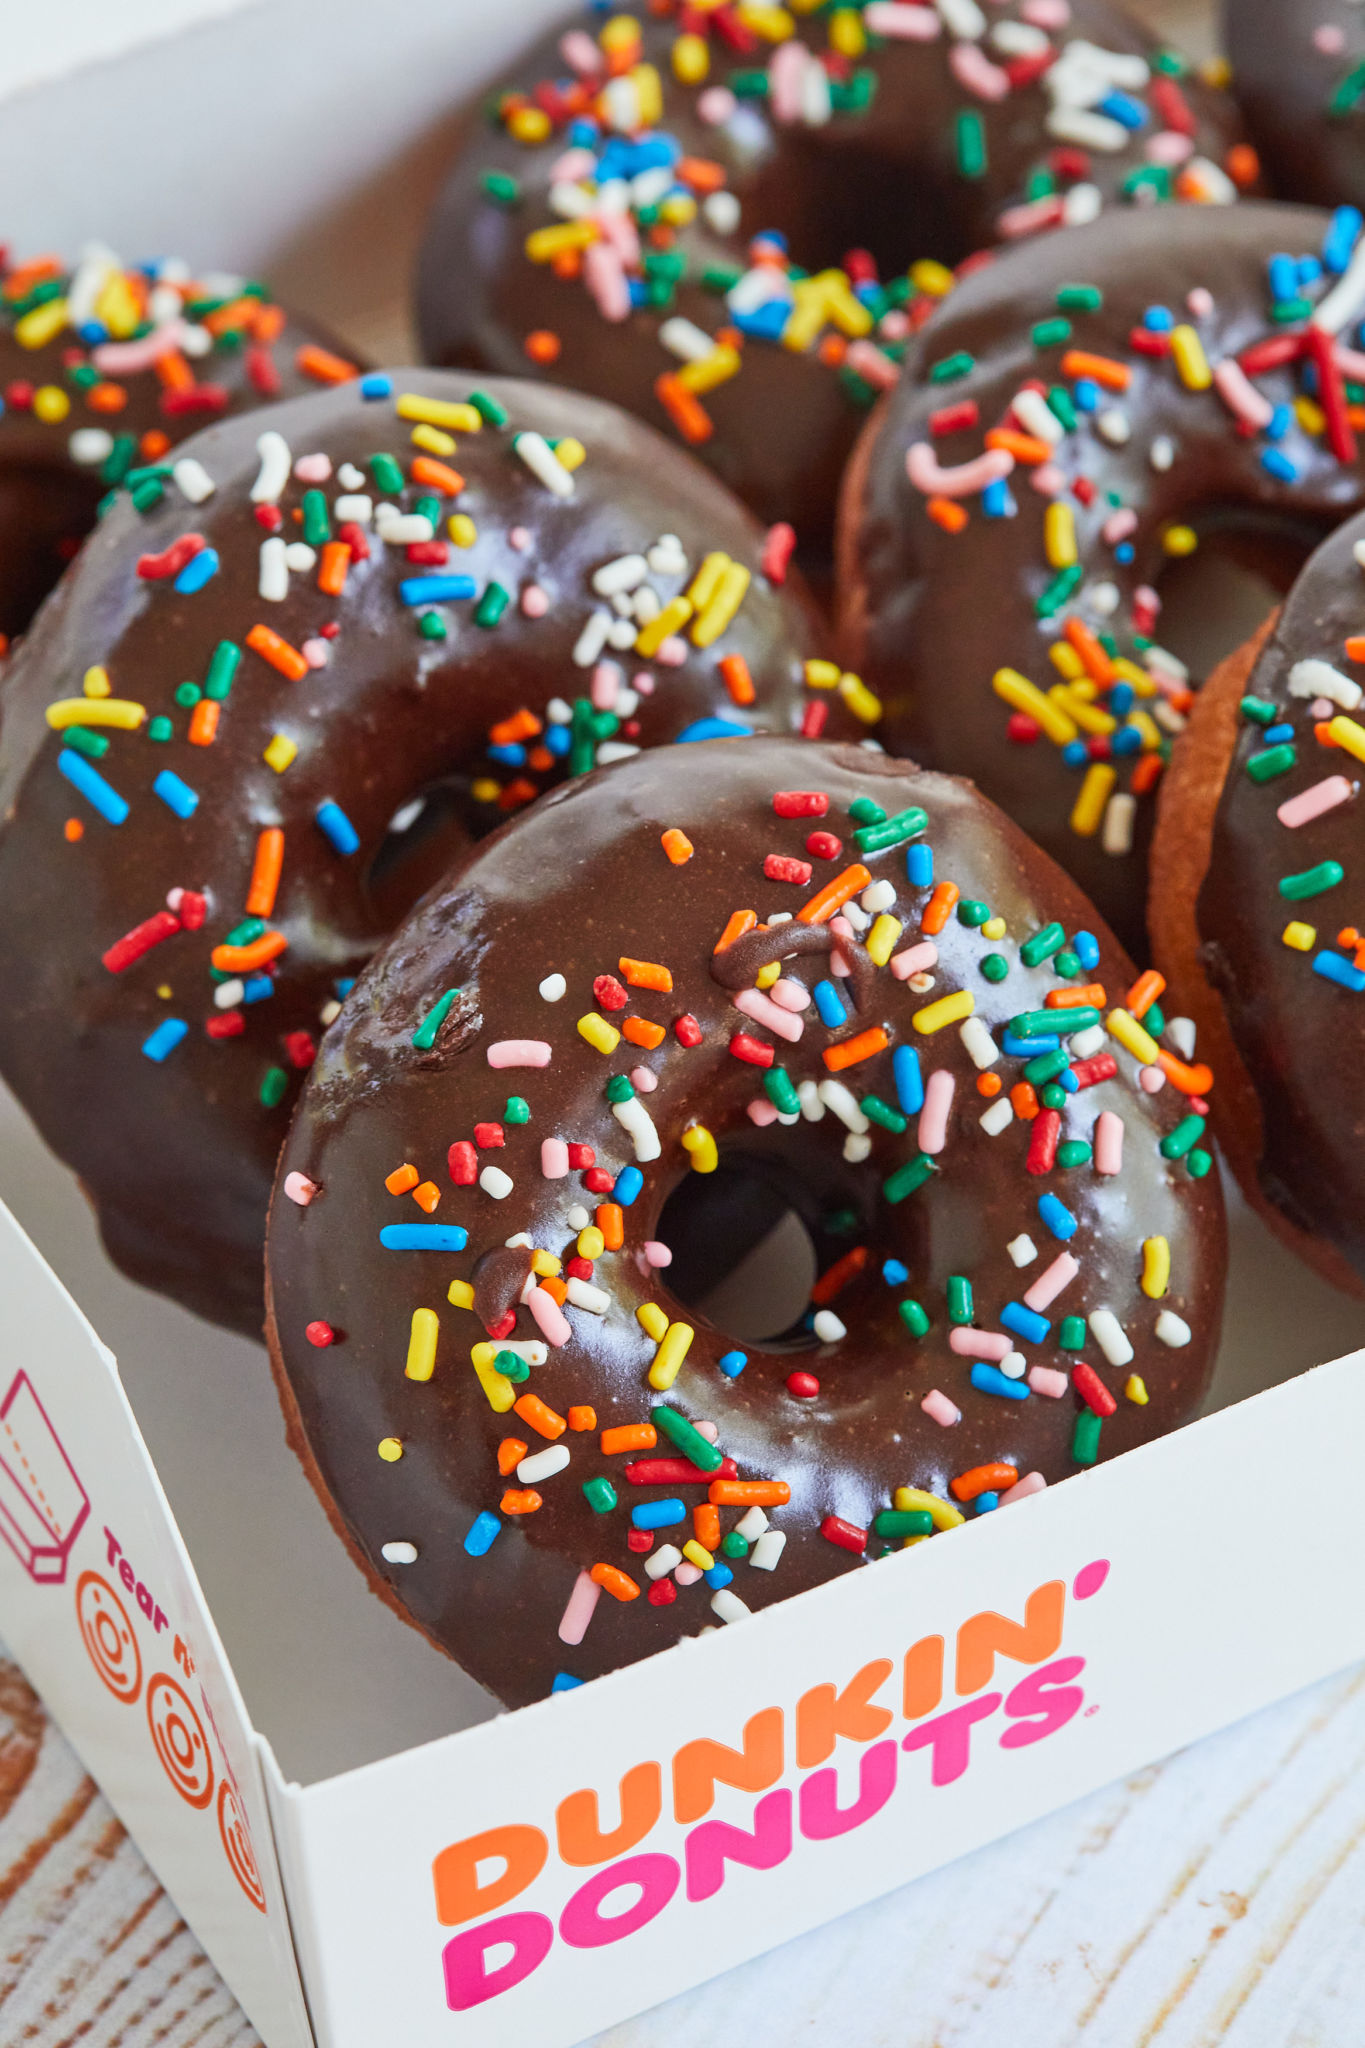 Make Perfect Dunkin Donuts Chocolate Glazed Donuts At Home